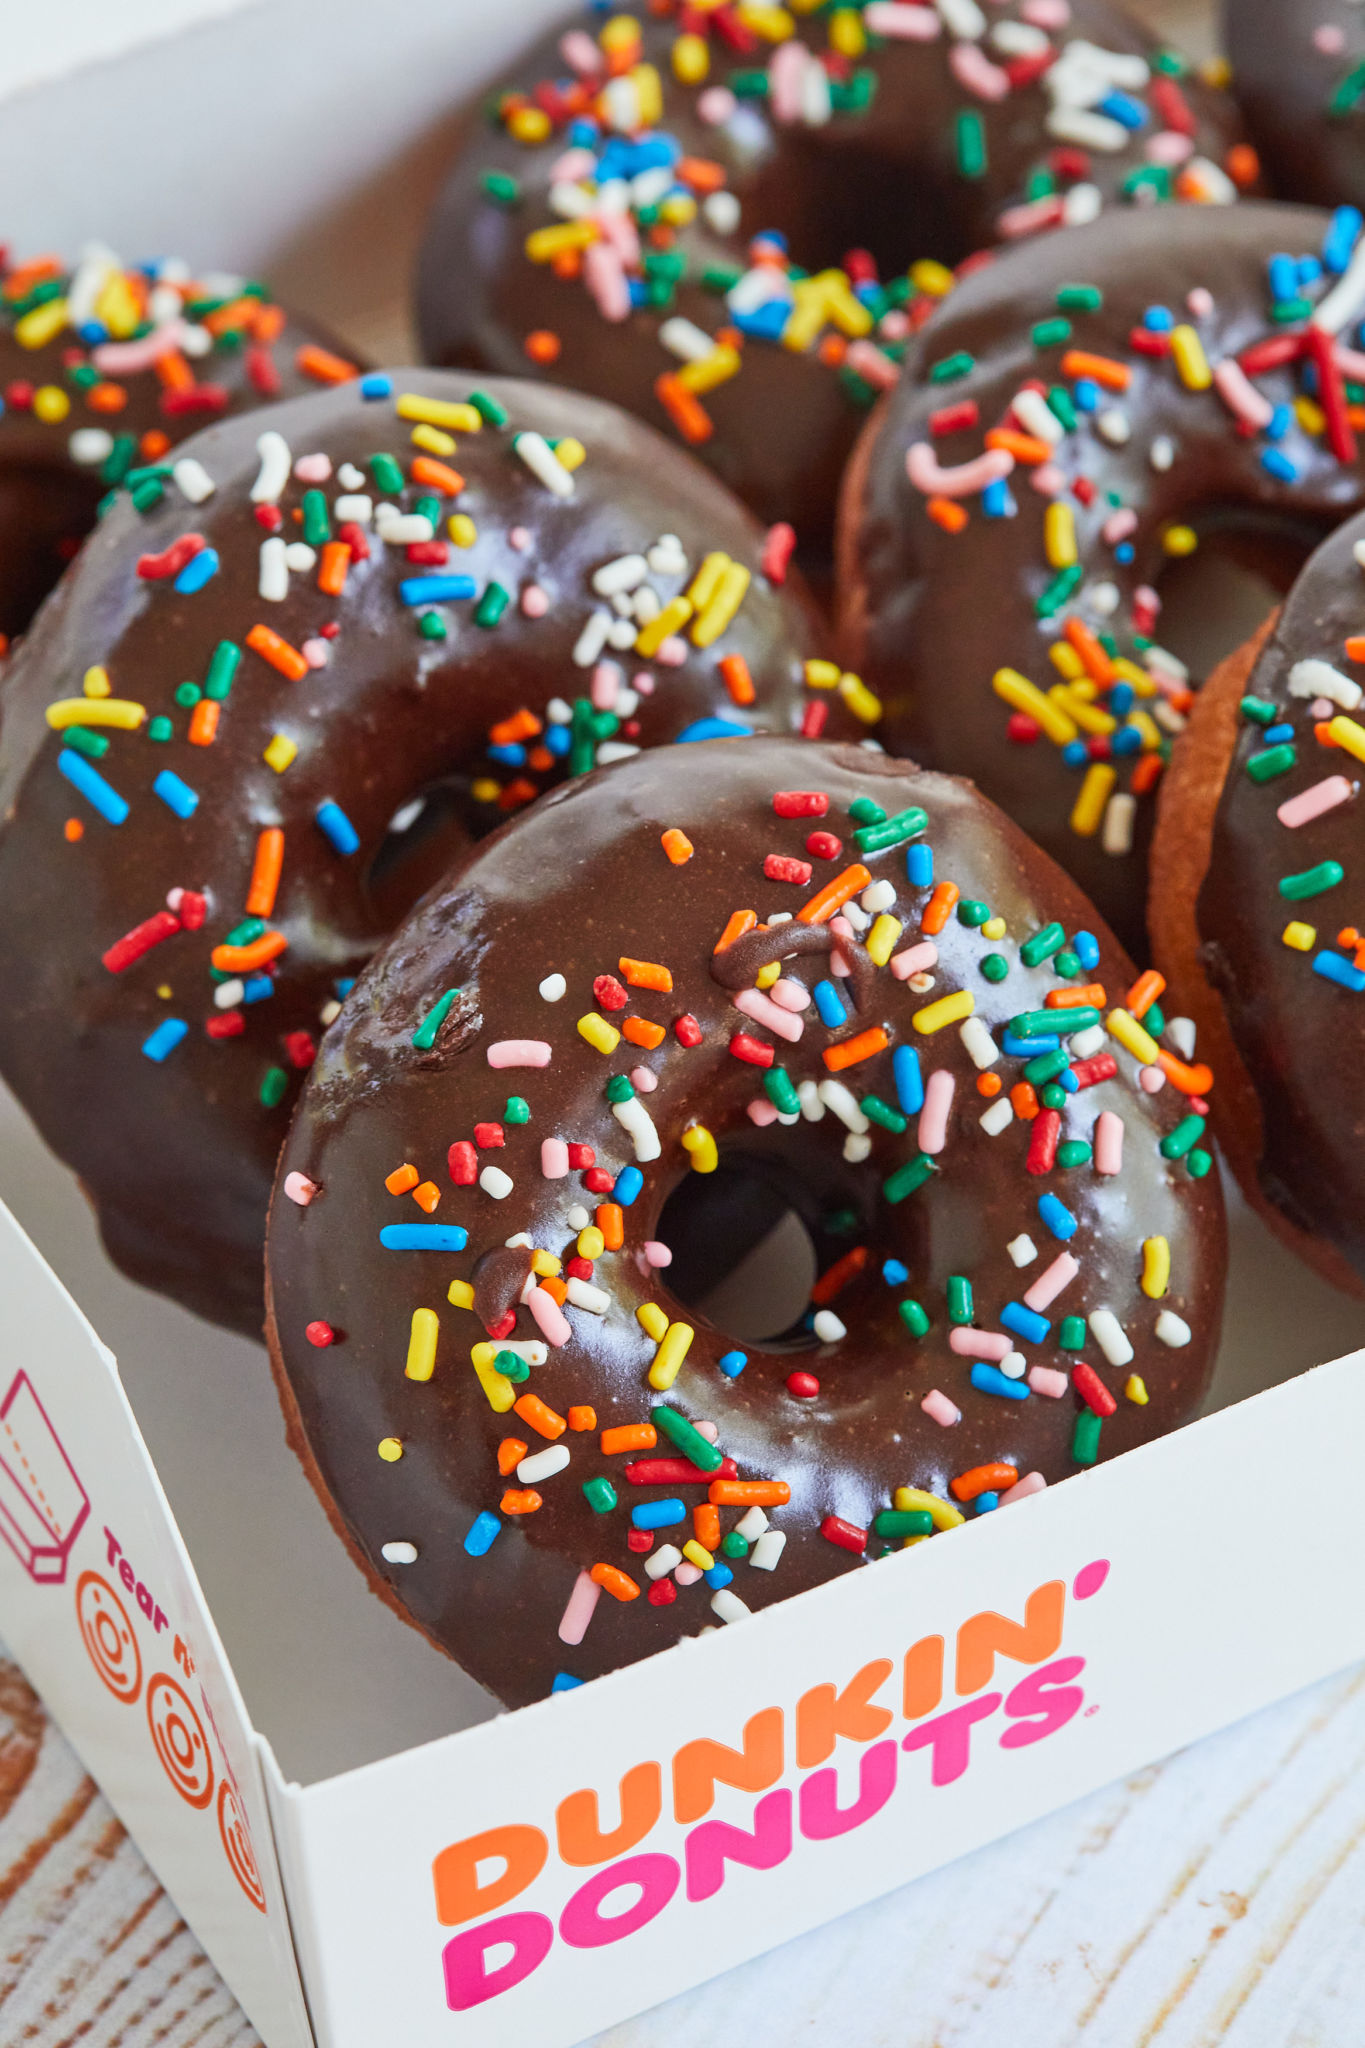 Make Perfect Dunkin Donuts Chocolate Glazed Donuts At Home